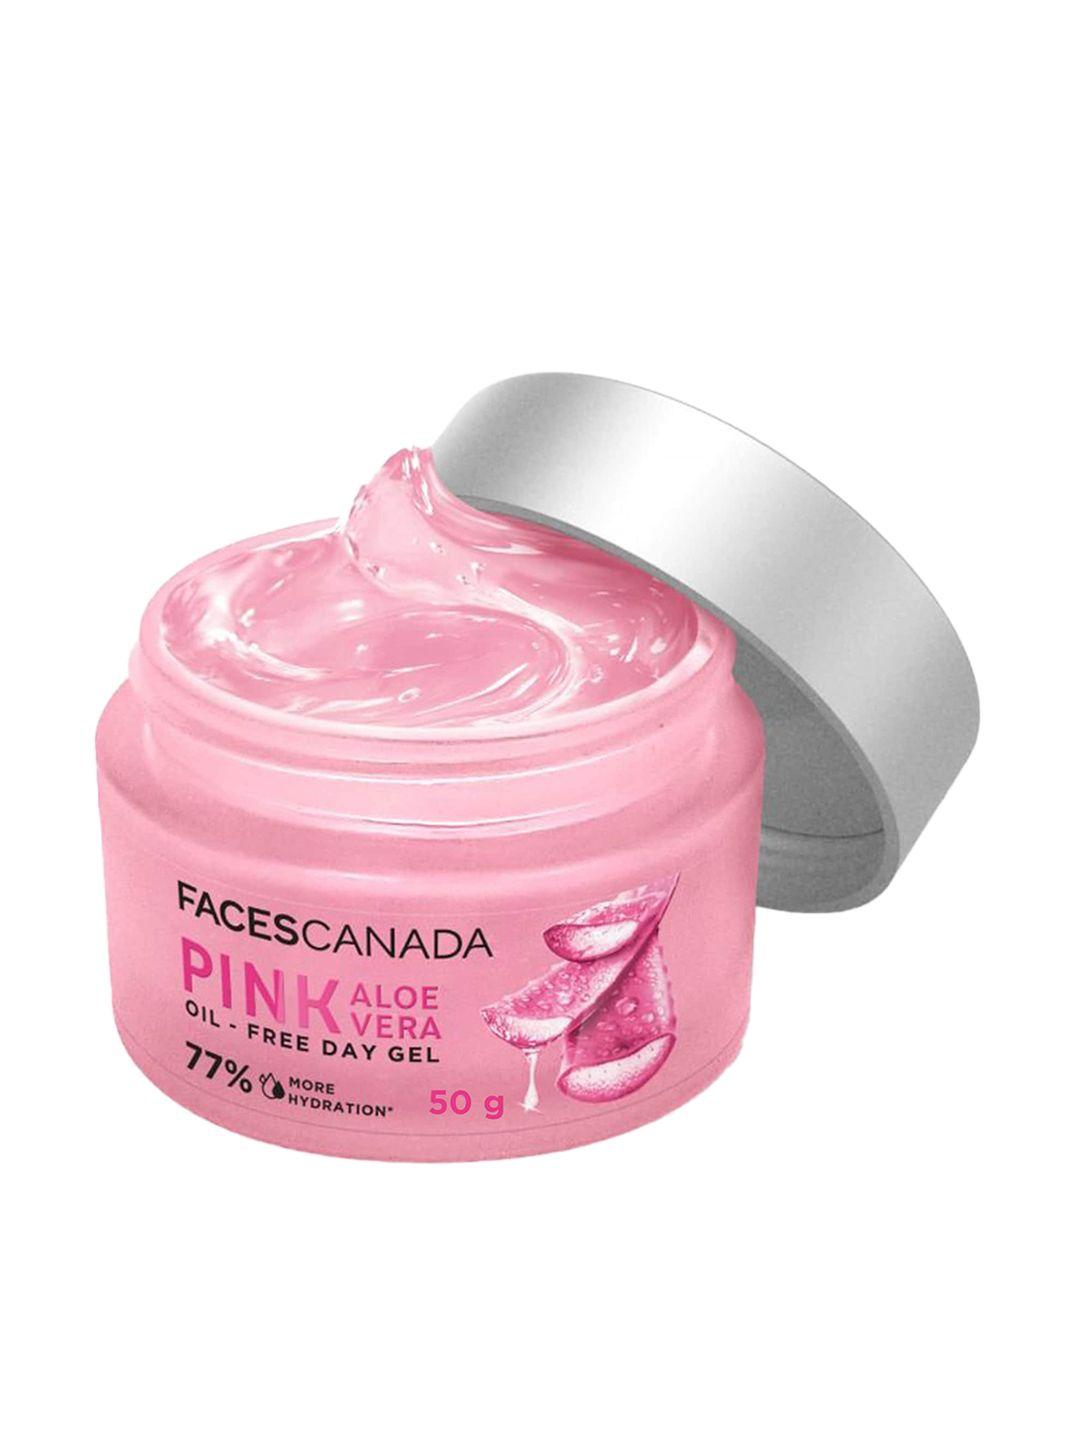 faces canada intense hydration 1.5% hyaluronic acid pink aloe vera oil-free day gel - 50g